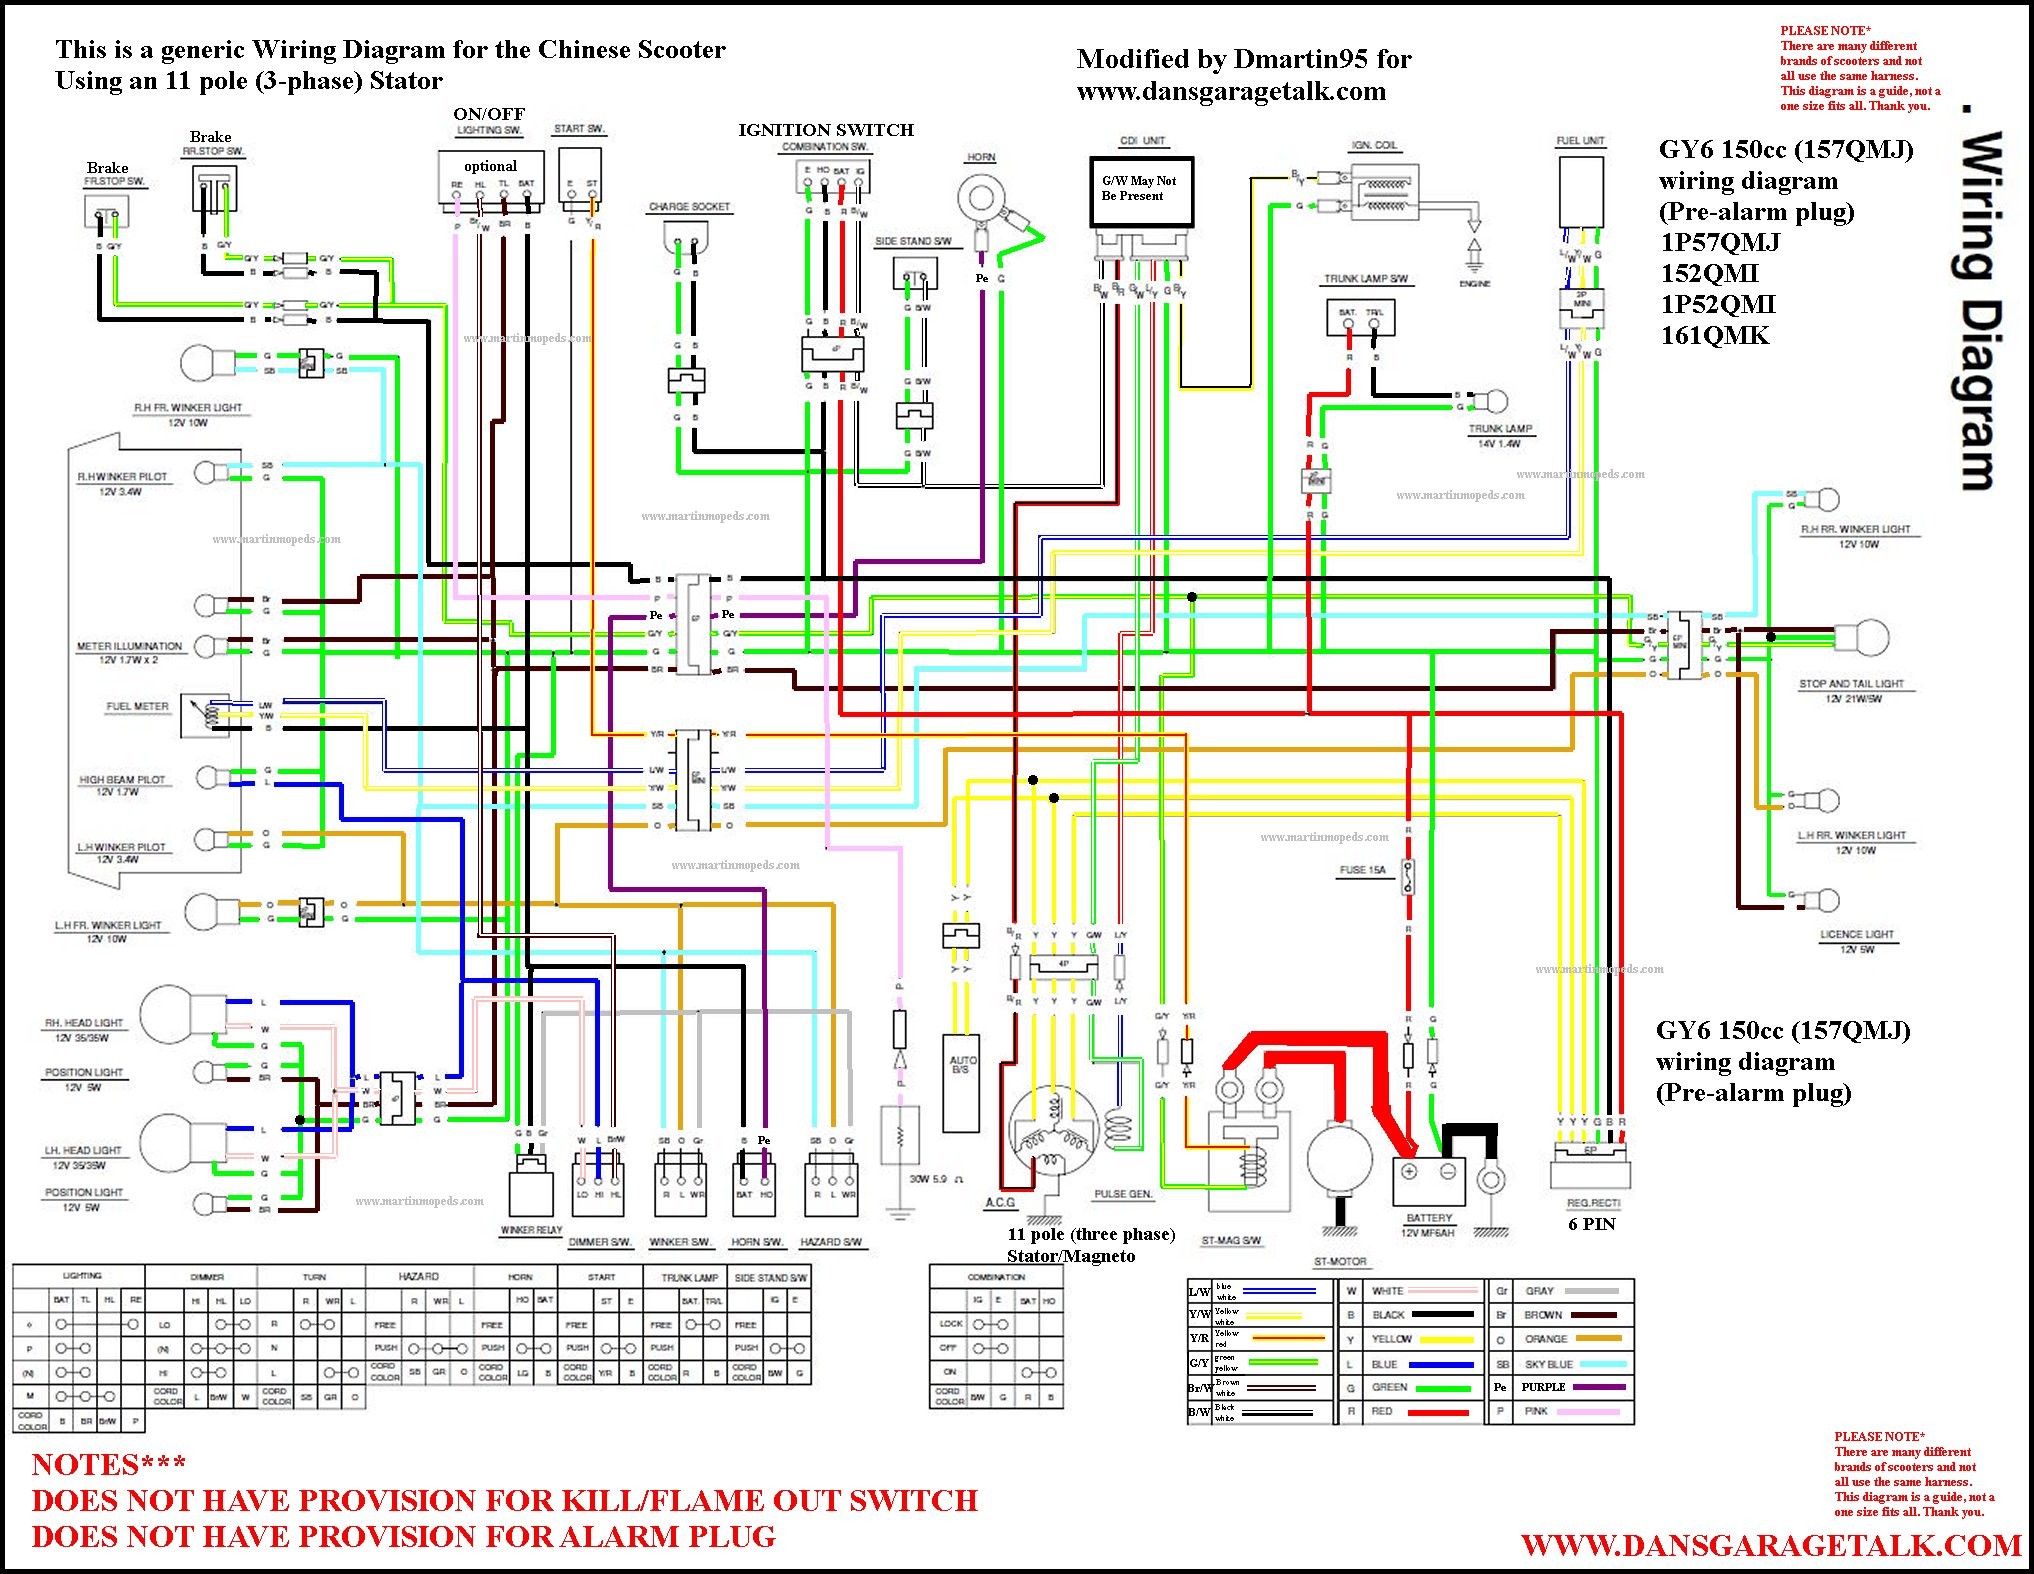 Chinese Scooter 11 Pole Wiring Harness Diagram Diagrams Fine Stator